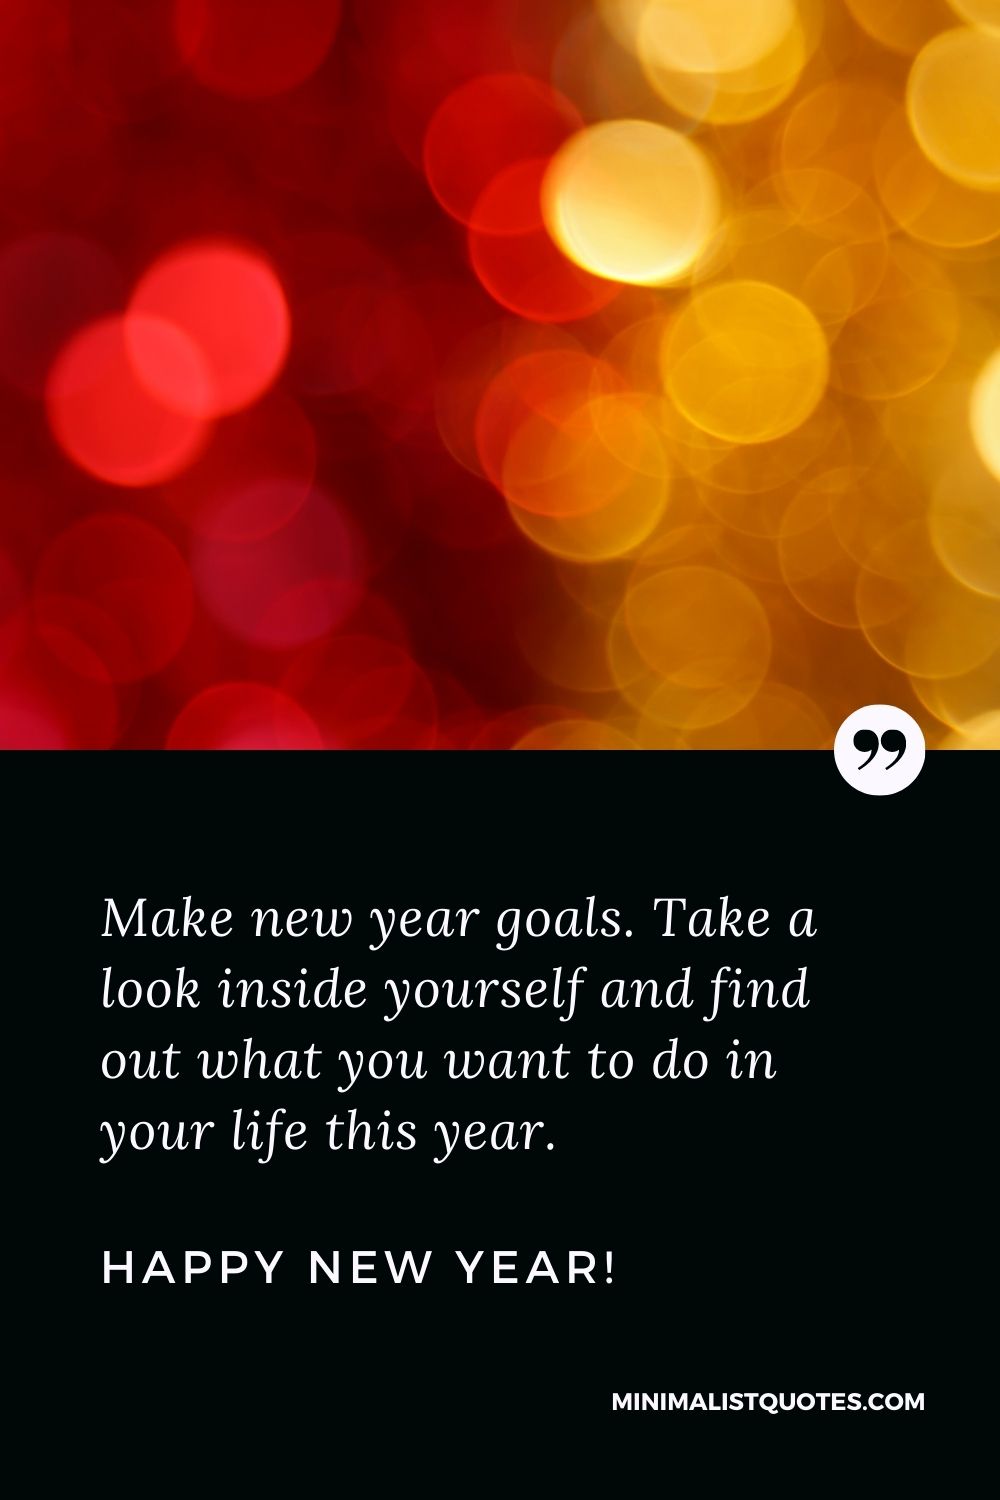 Best Inspirational New Year Quote: Make new year goals. Take a look inside yourself and find out what you want to do in your life this year. Happy New Year!